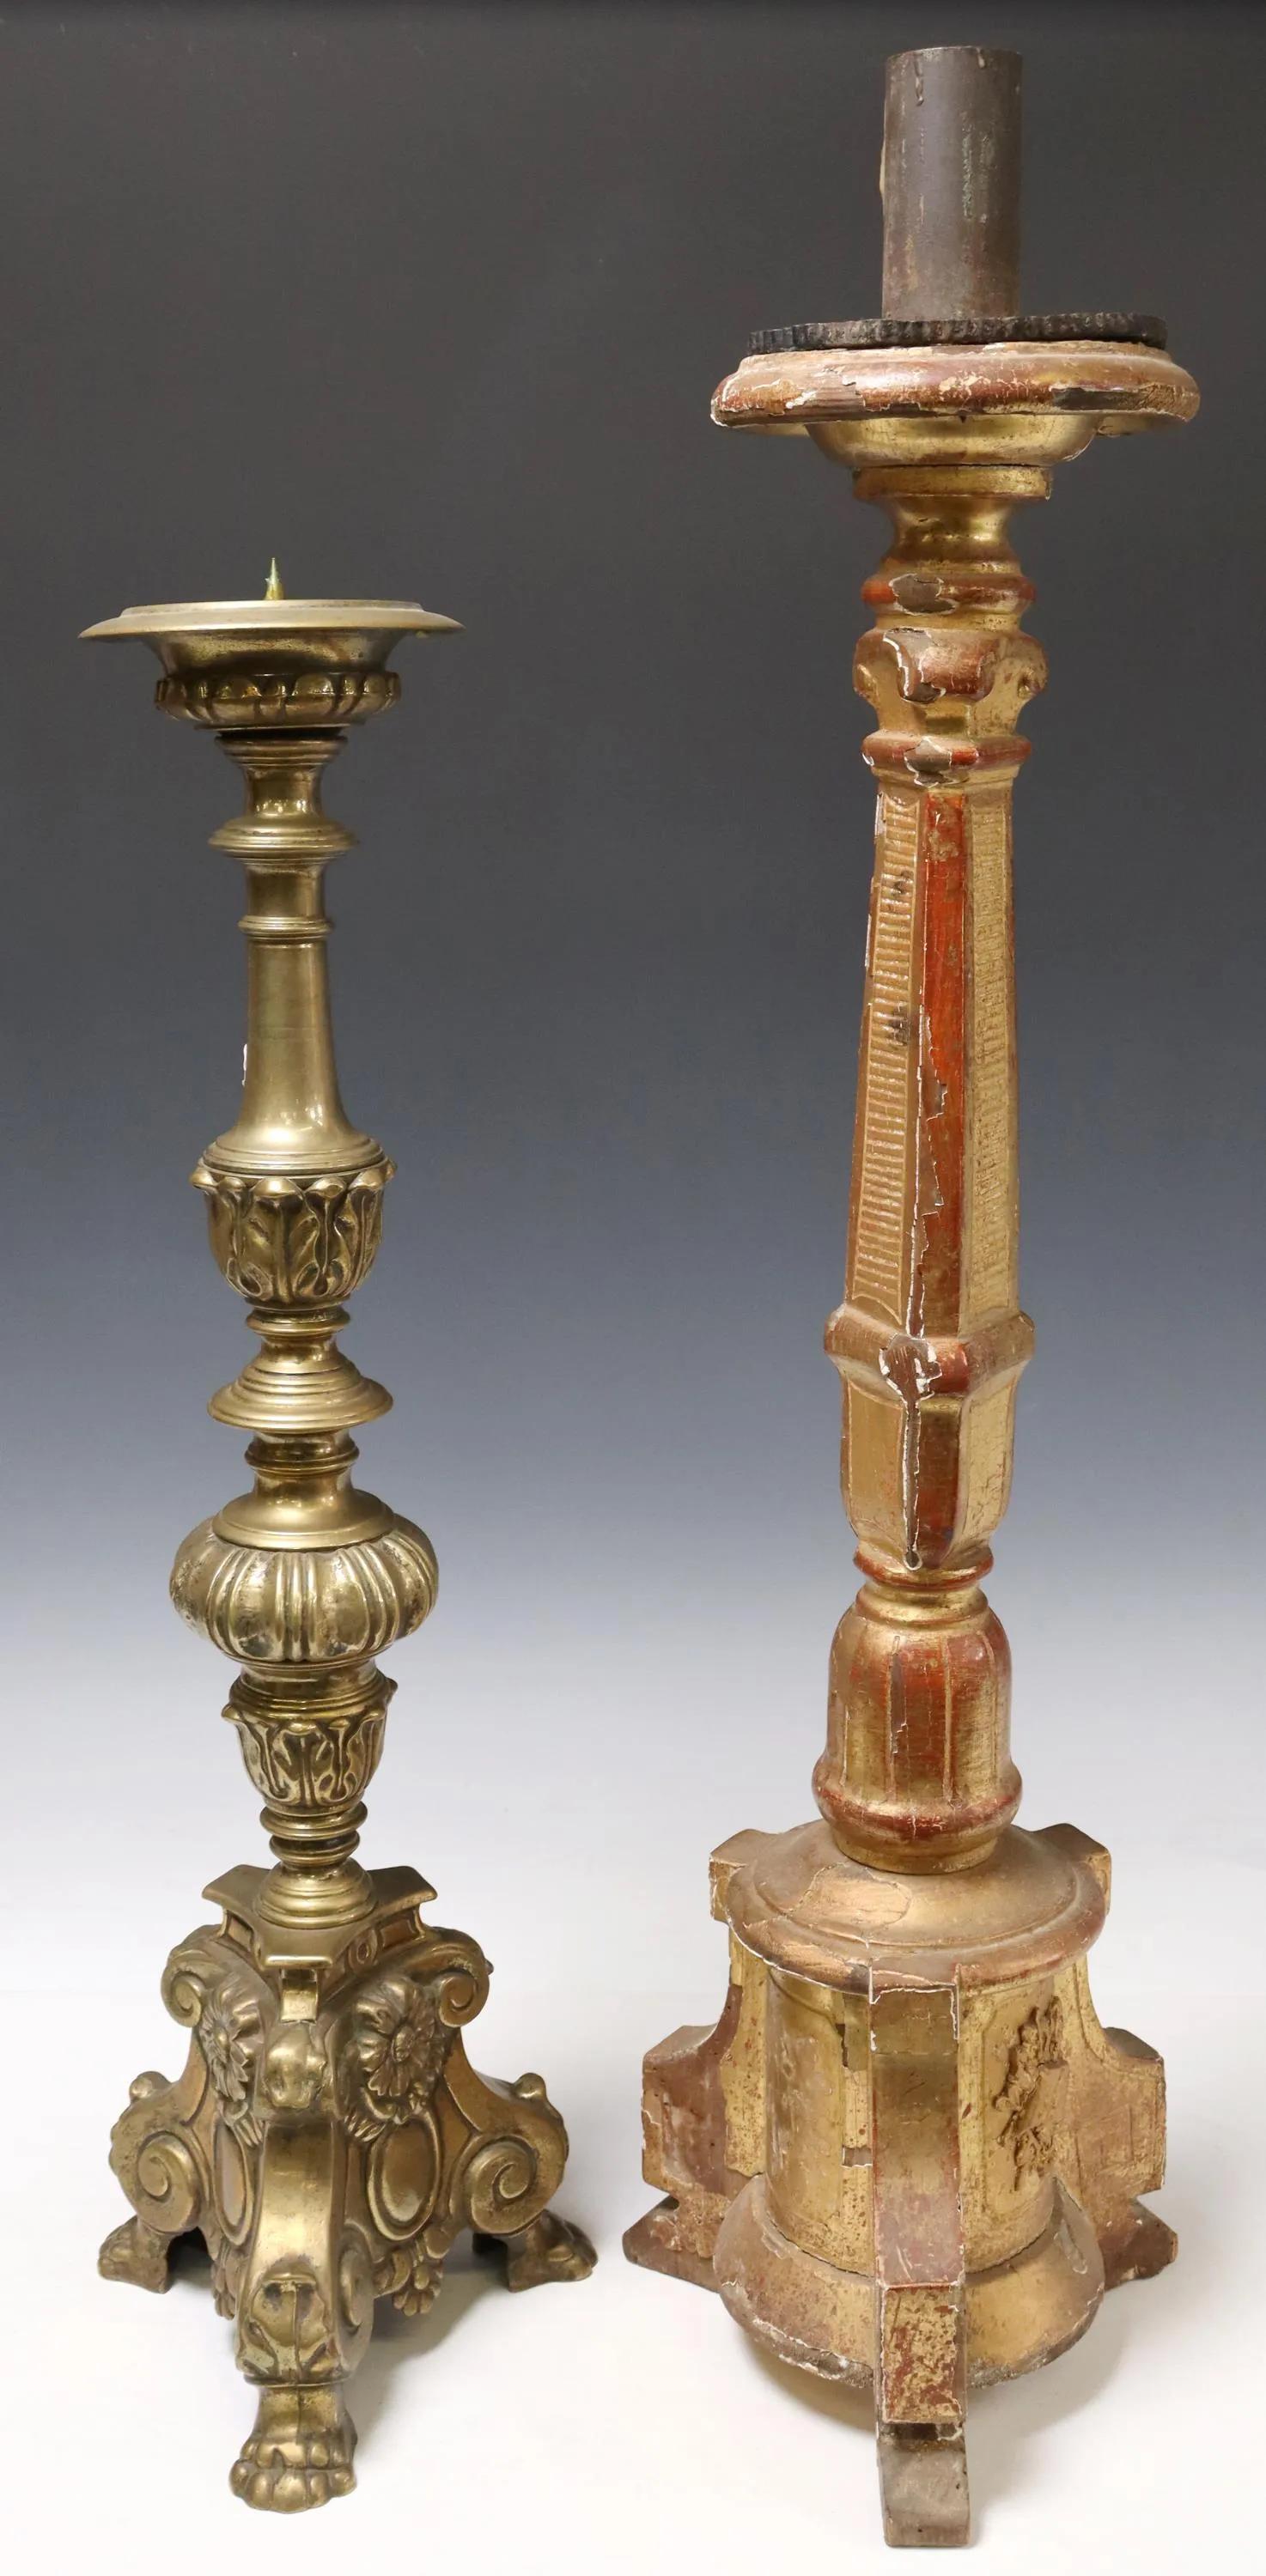 Antique Bronze & Giltwood Church Altar Candlesticks In Good Condition For Sale In Sheridan, CO